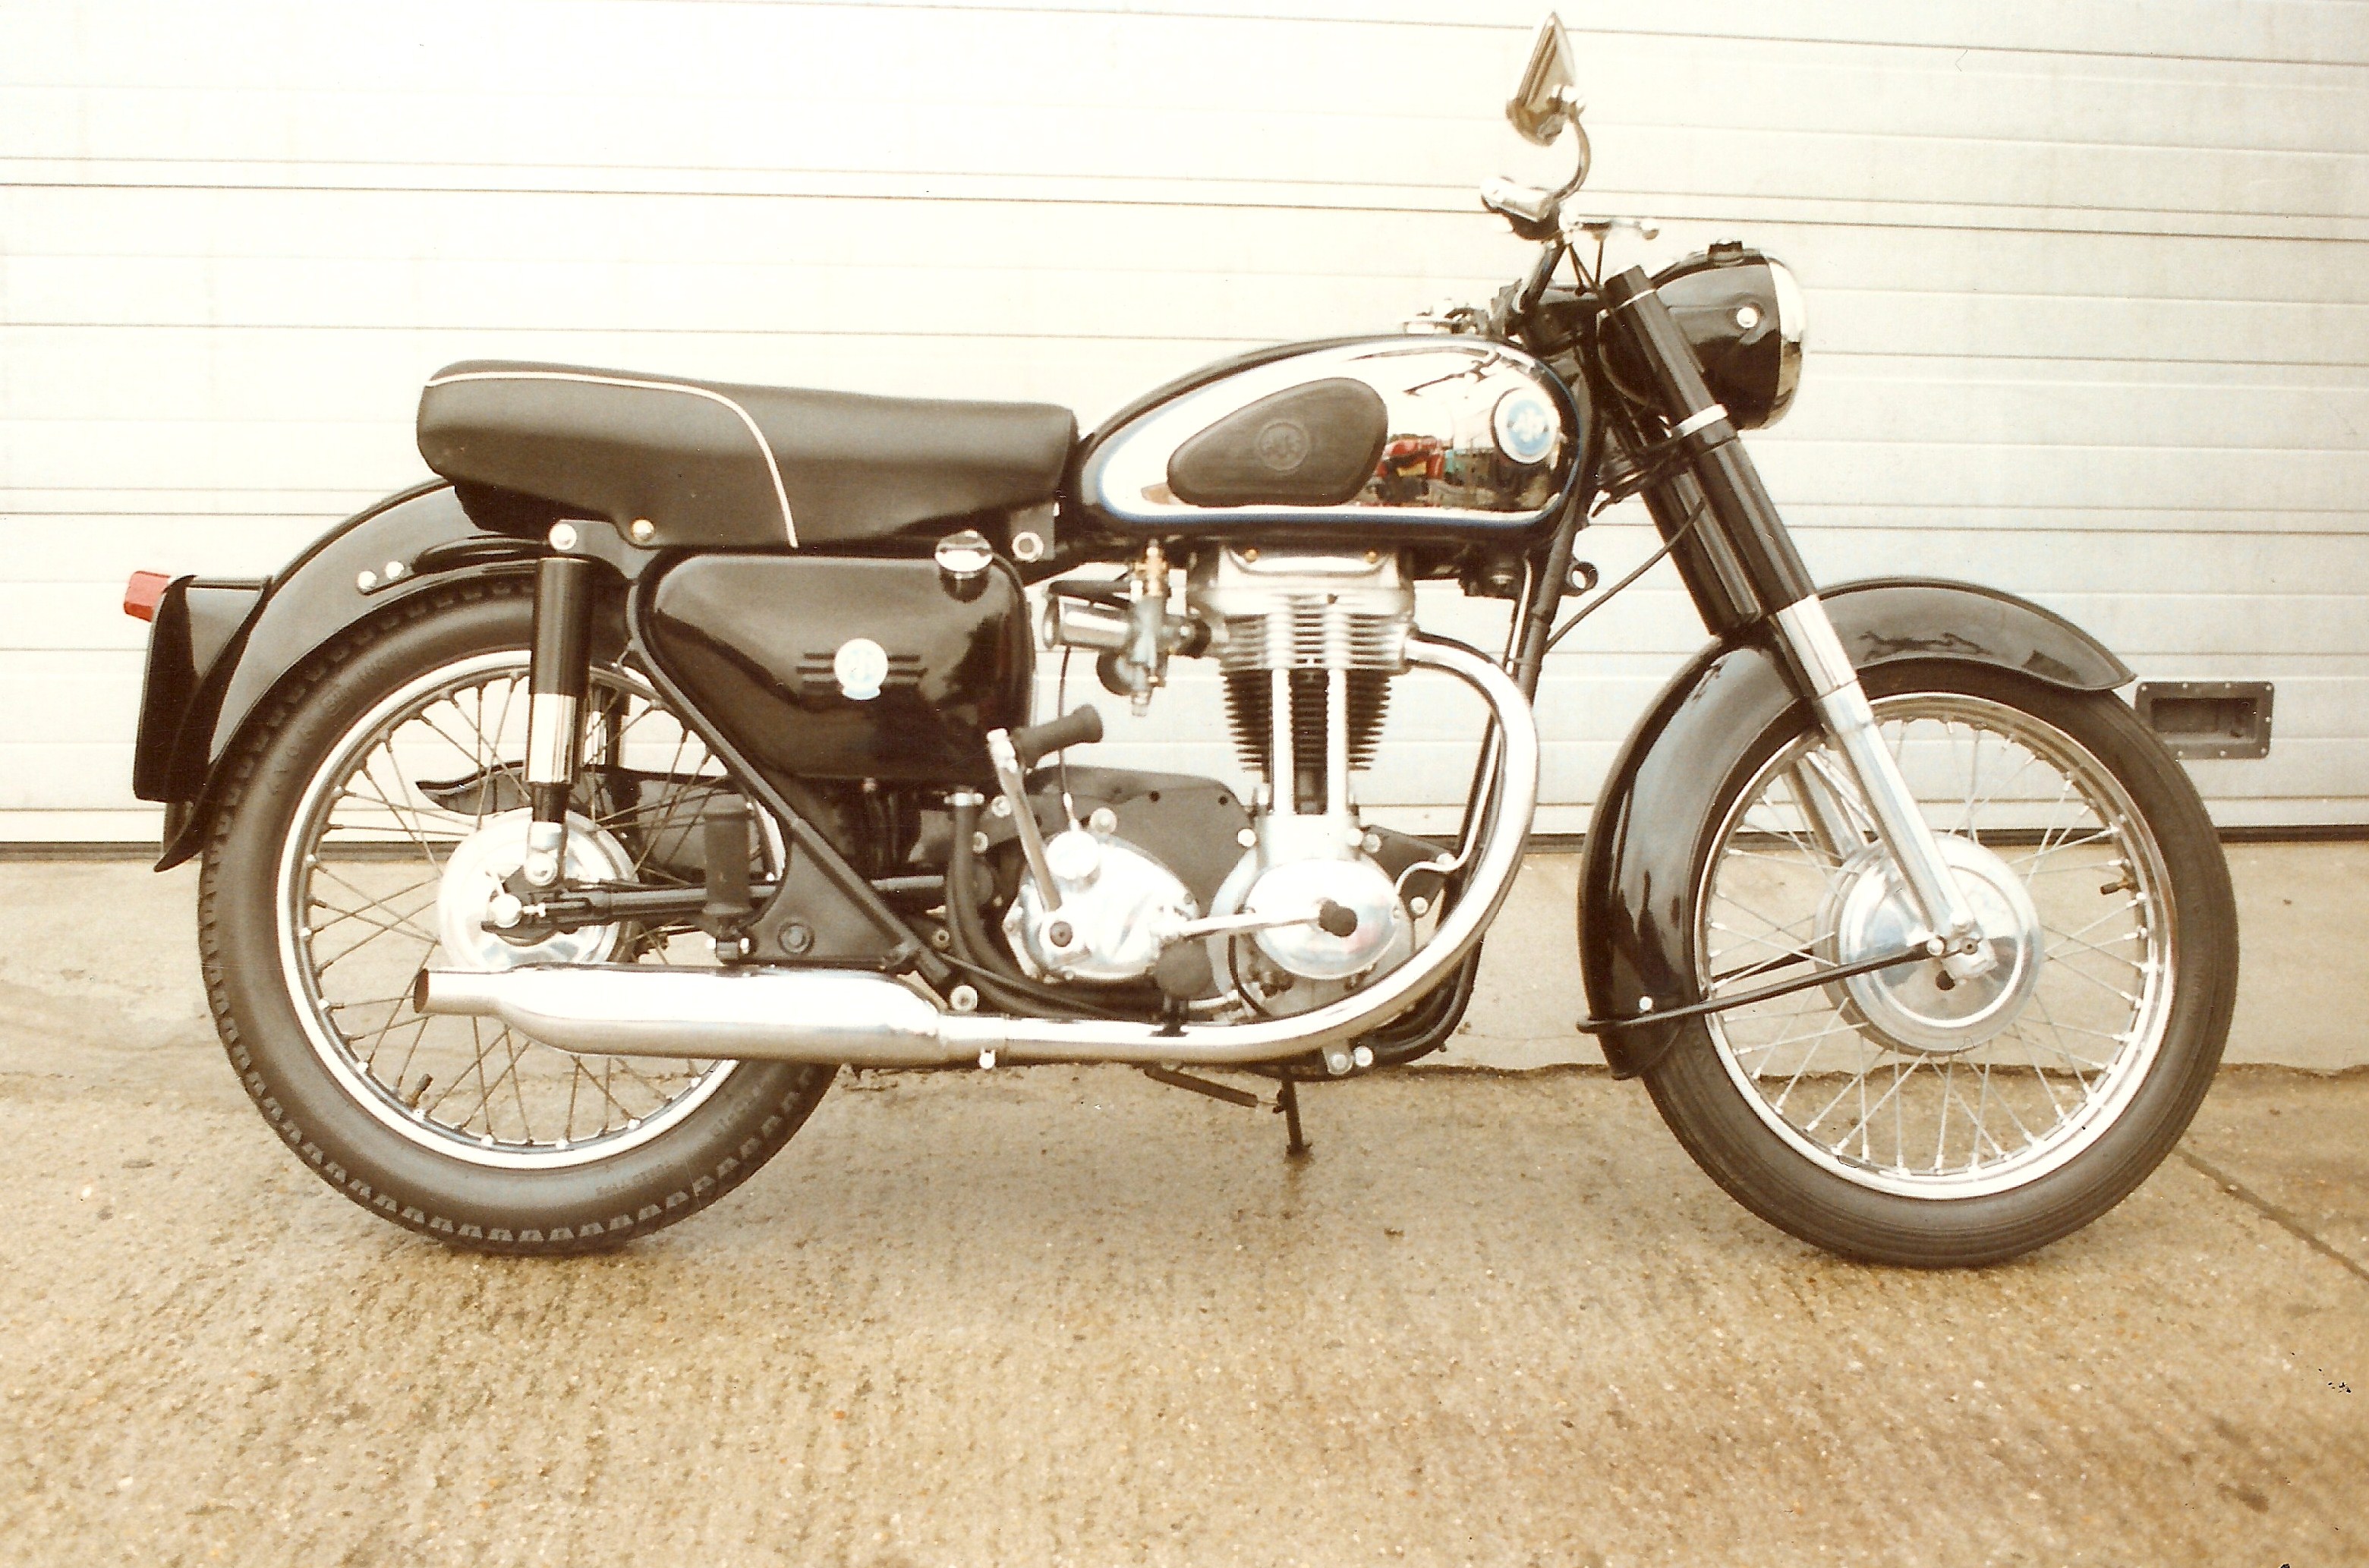 We have restored numerous AMC's of all brand name persuasions now.from this not very esteemed but handsome and practical late AJS model 16MS (some times unkindly known as the 'pee pot points' model)